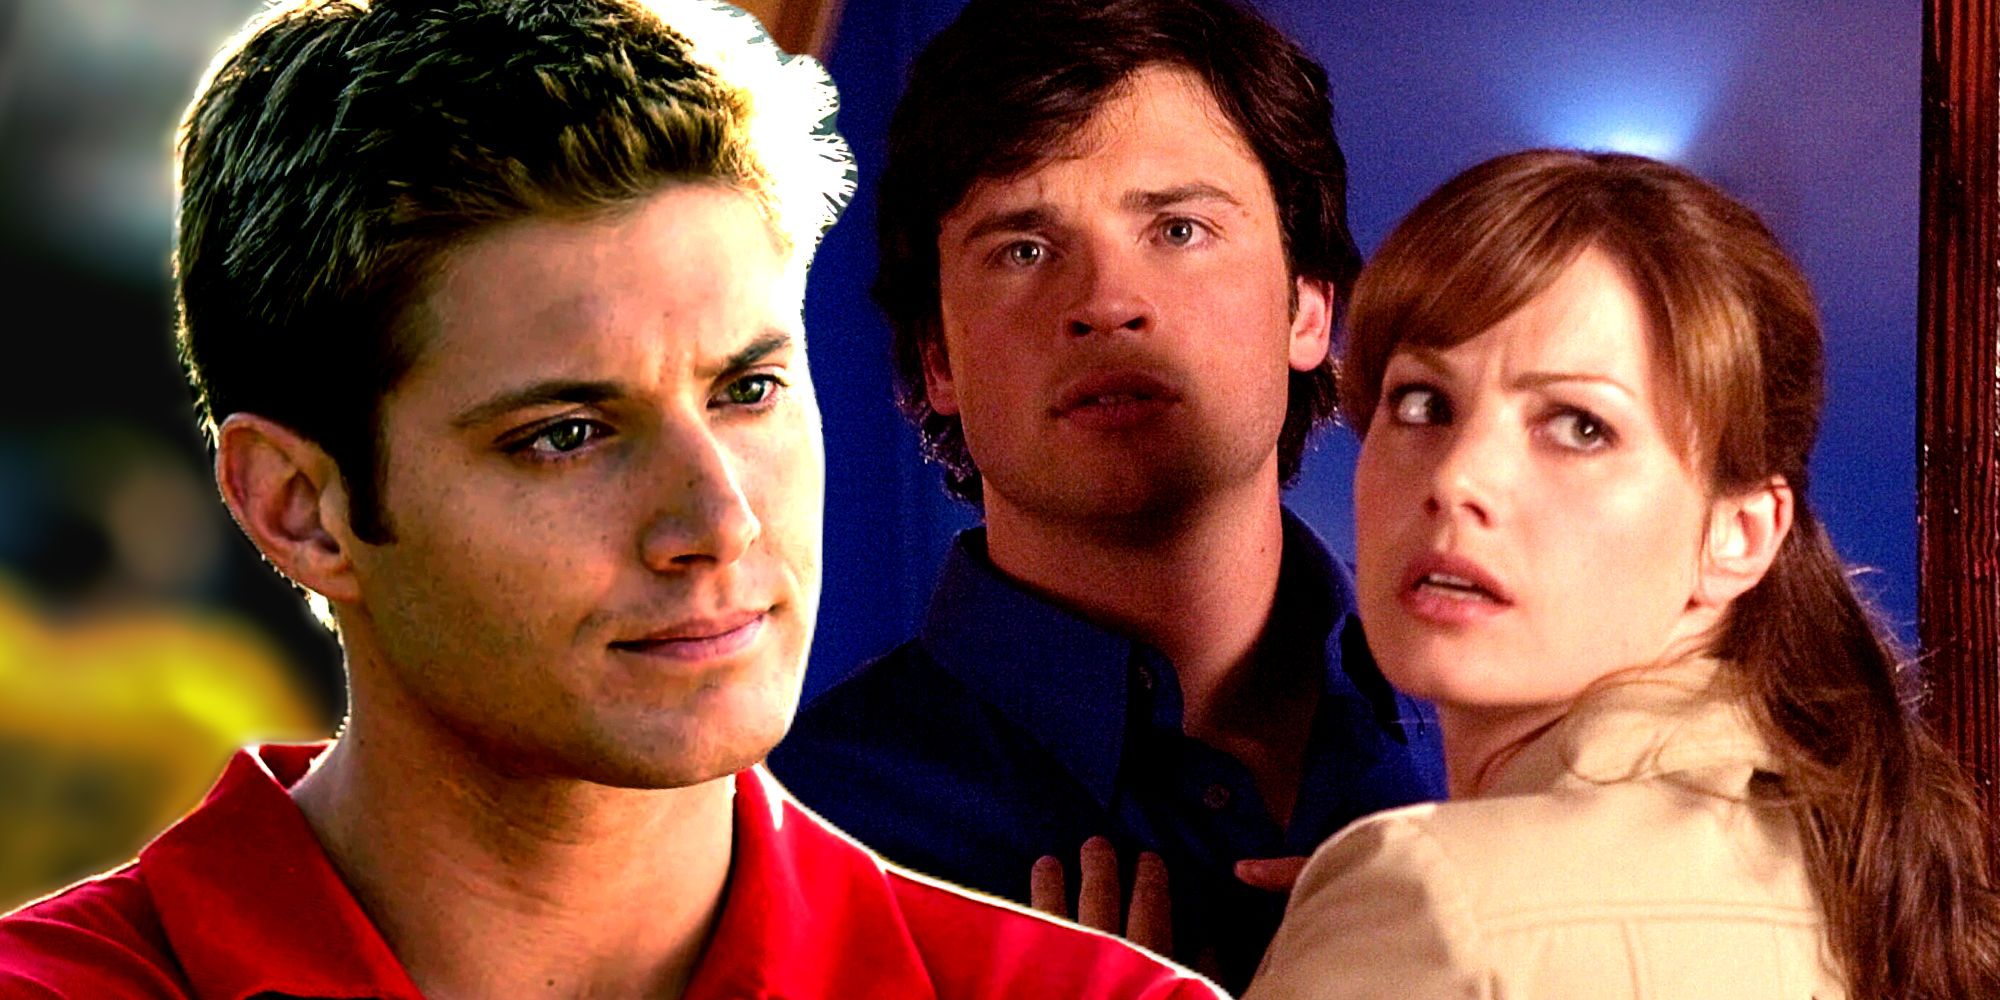 Jensen Ackles as Jason Teague with Tom Welling's Clark Kent and Erica Durance's Lois Lane in Smallville